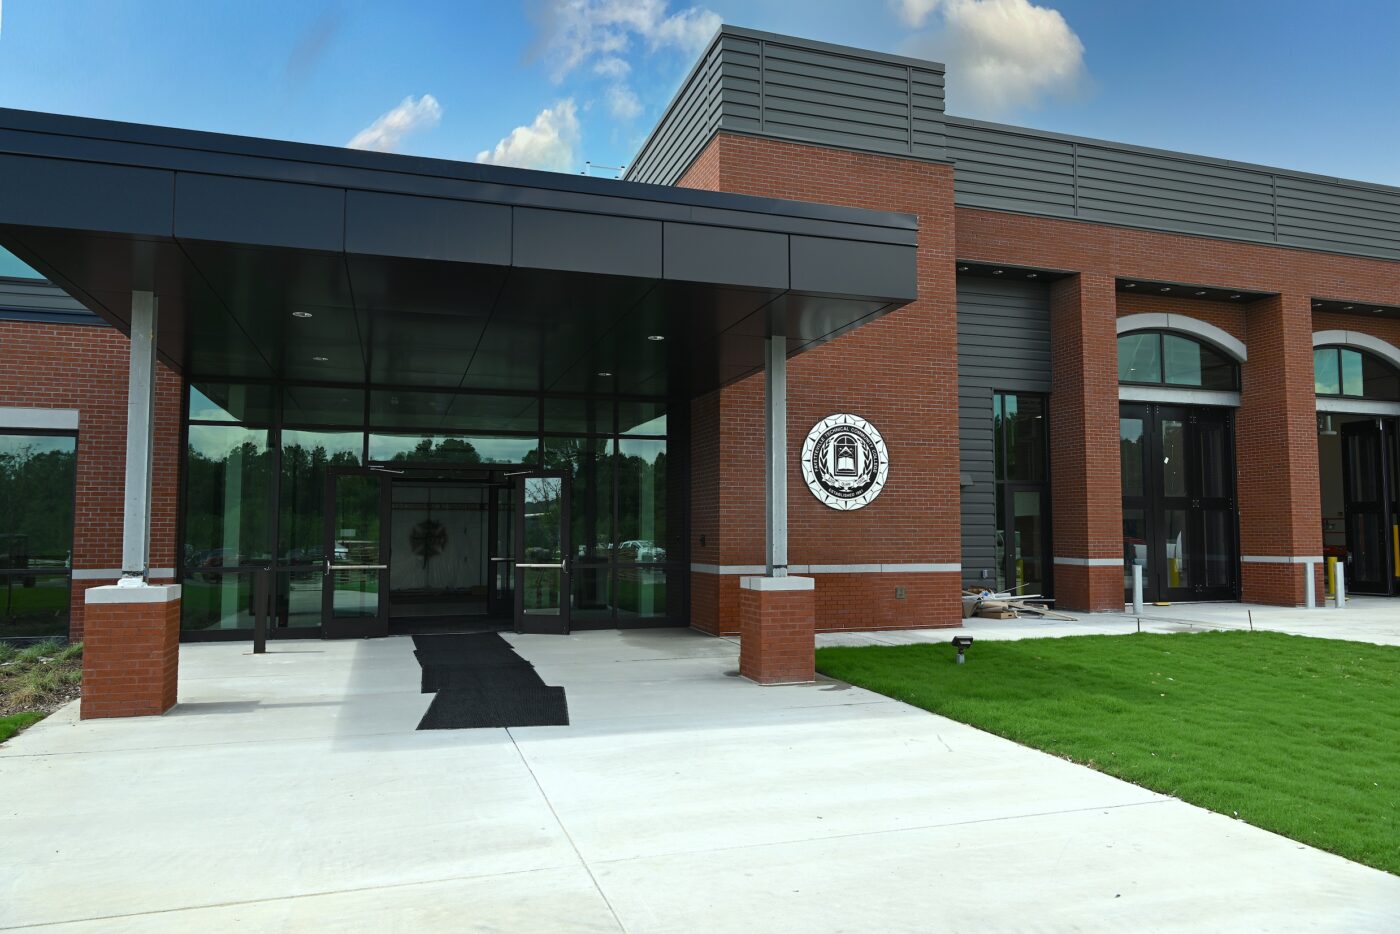 Entryway to a brick and black steel building with the FTCC seal on the wall.